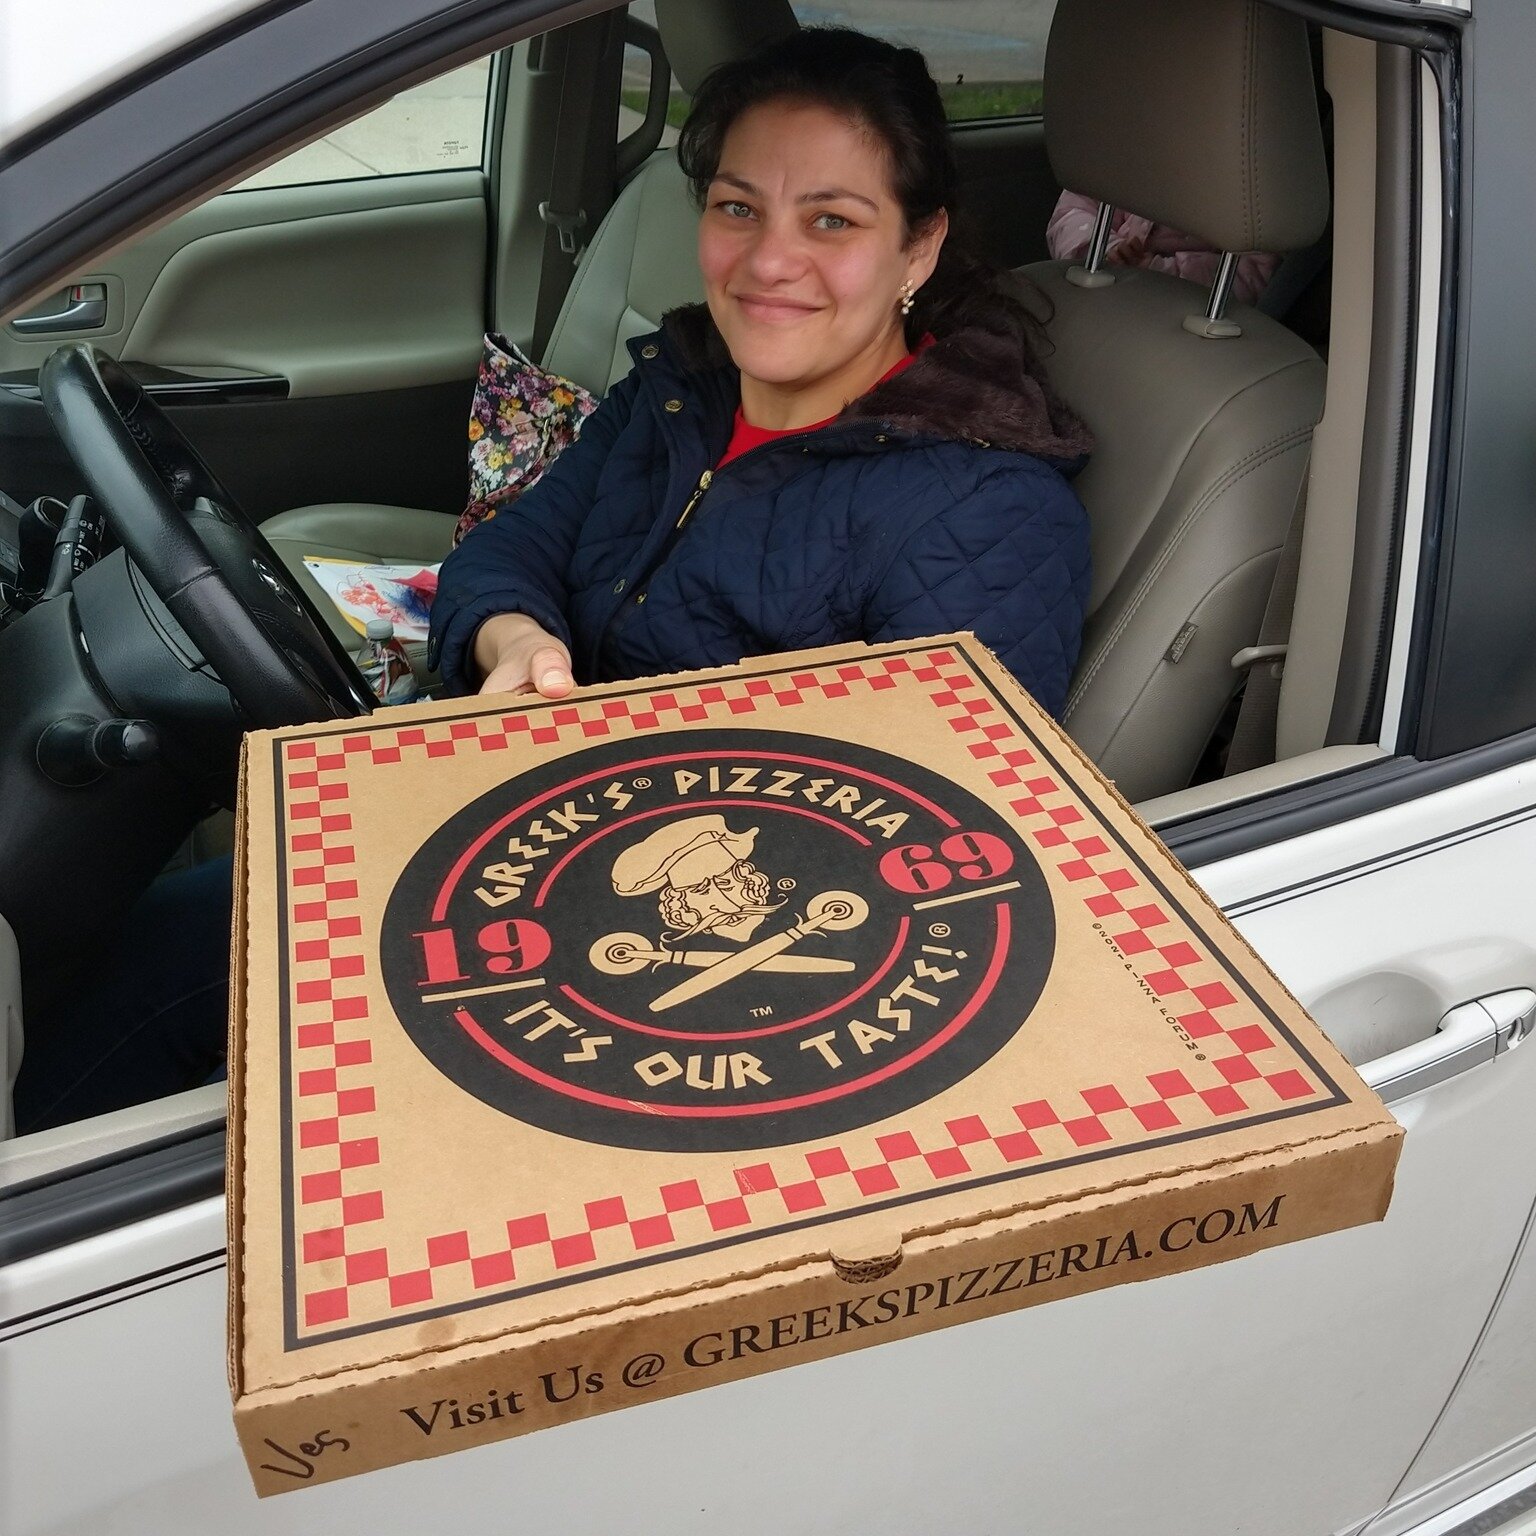 Our #SliceOutHunger members are winning the fight against hunger🤩 We'd like to give a special shoutout to @greeksincarmel, who sent 10 boxes of #Pizza4Good to @mercifulhelpcenter this month 🍕🤝 Keep slicing out hunger everyone!

#endhunger #PieItFo